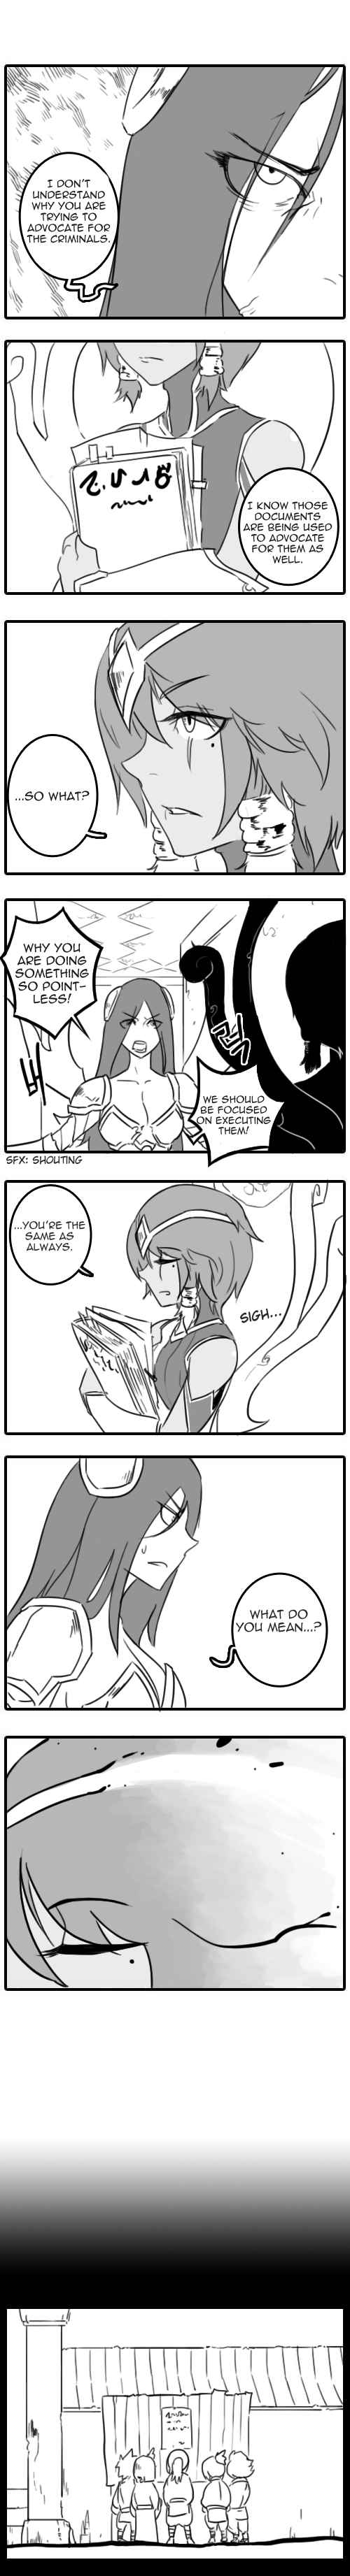 League of Legends Syndra & Zed's Everyday Life (Doujinshi) Vol. 2 Ch. 28